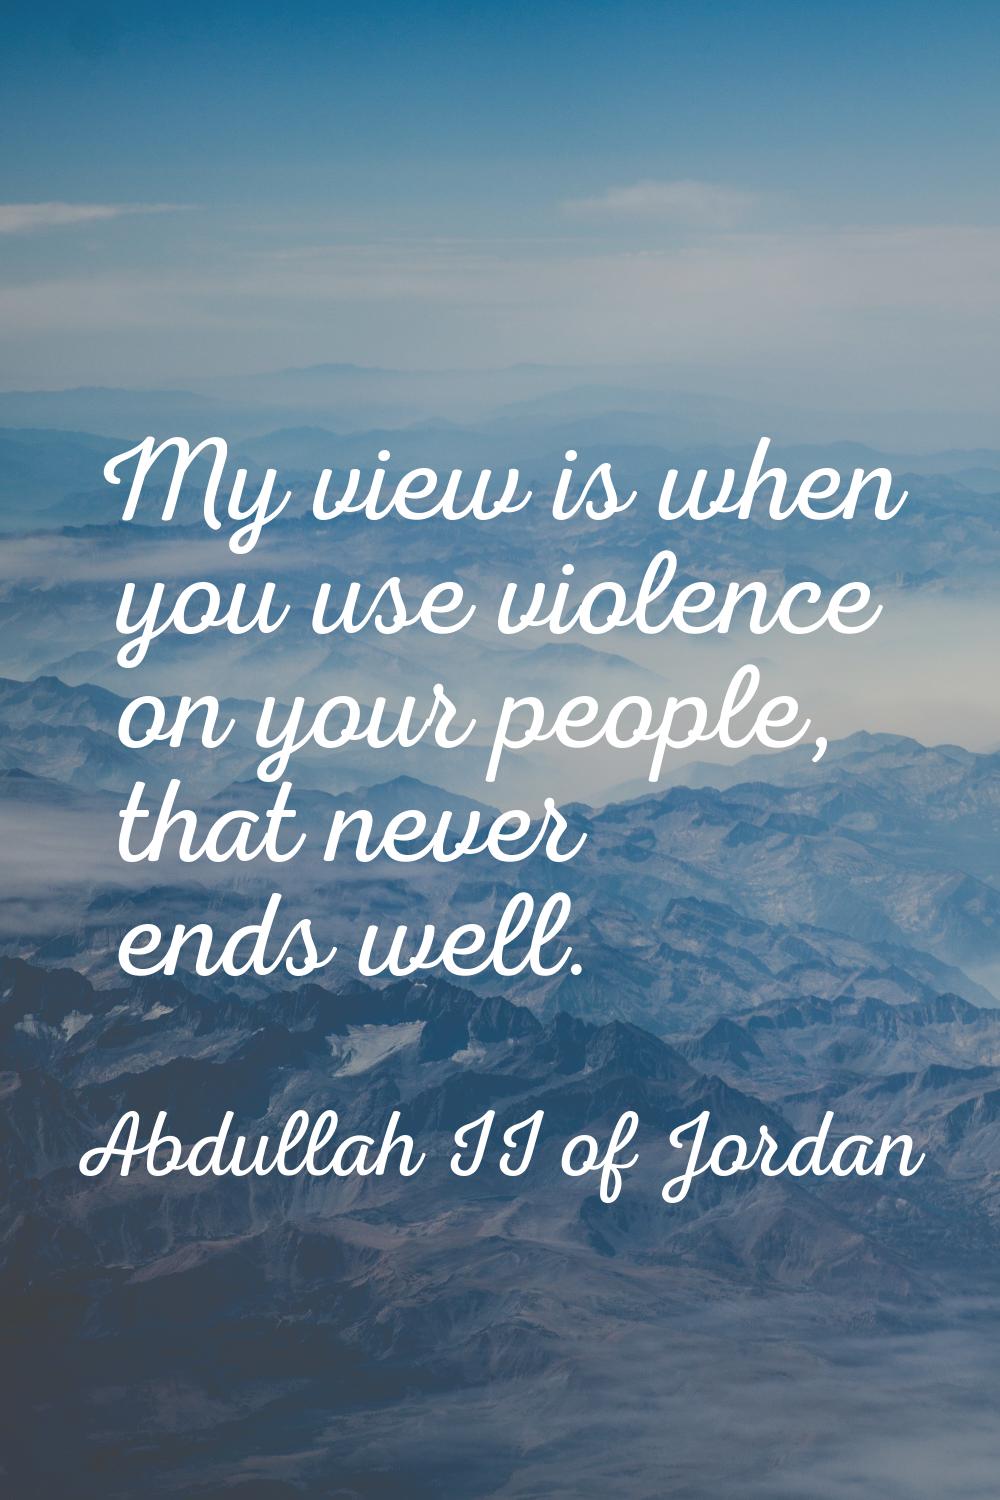 My view is when you use violence on your people, that never ends well.